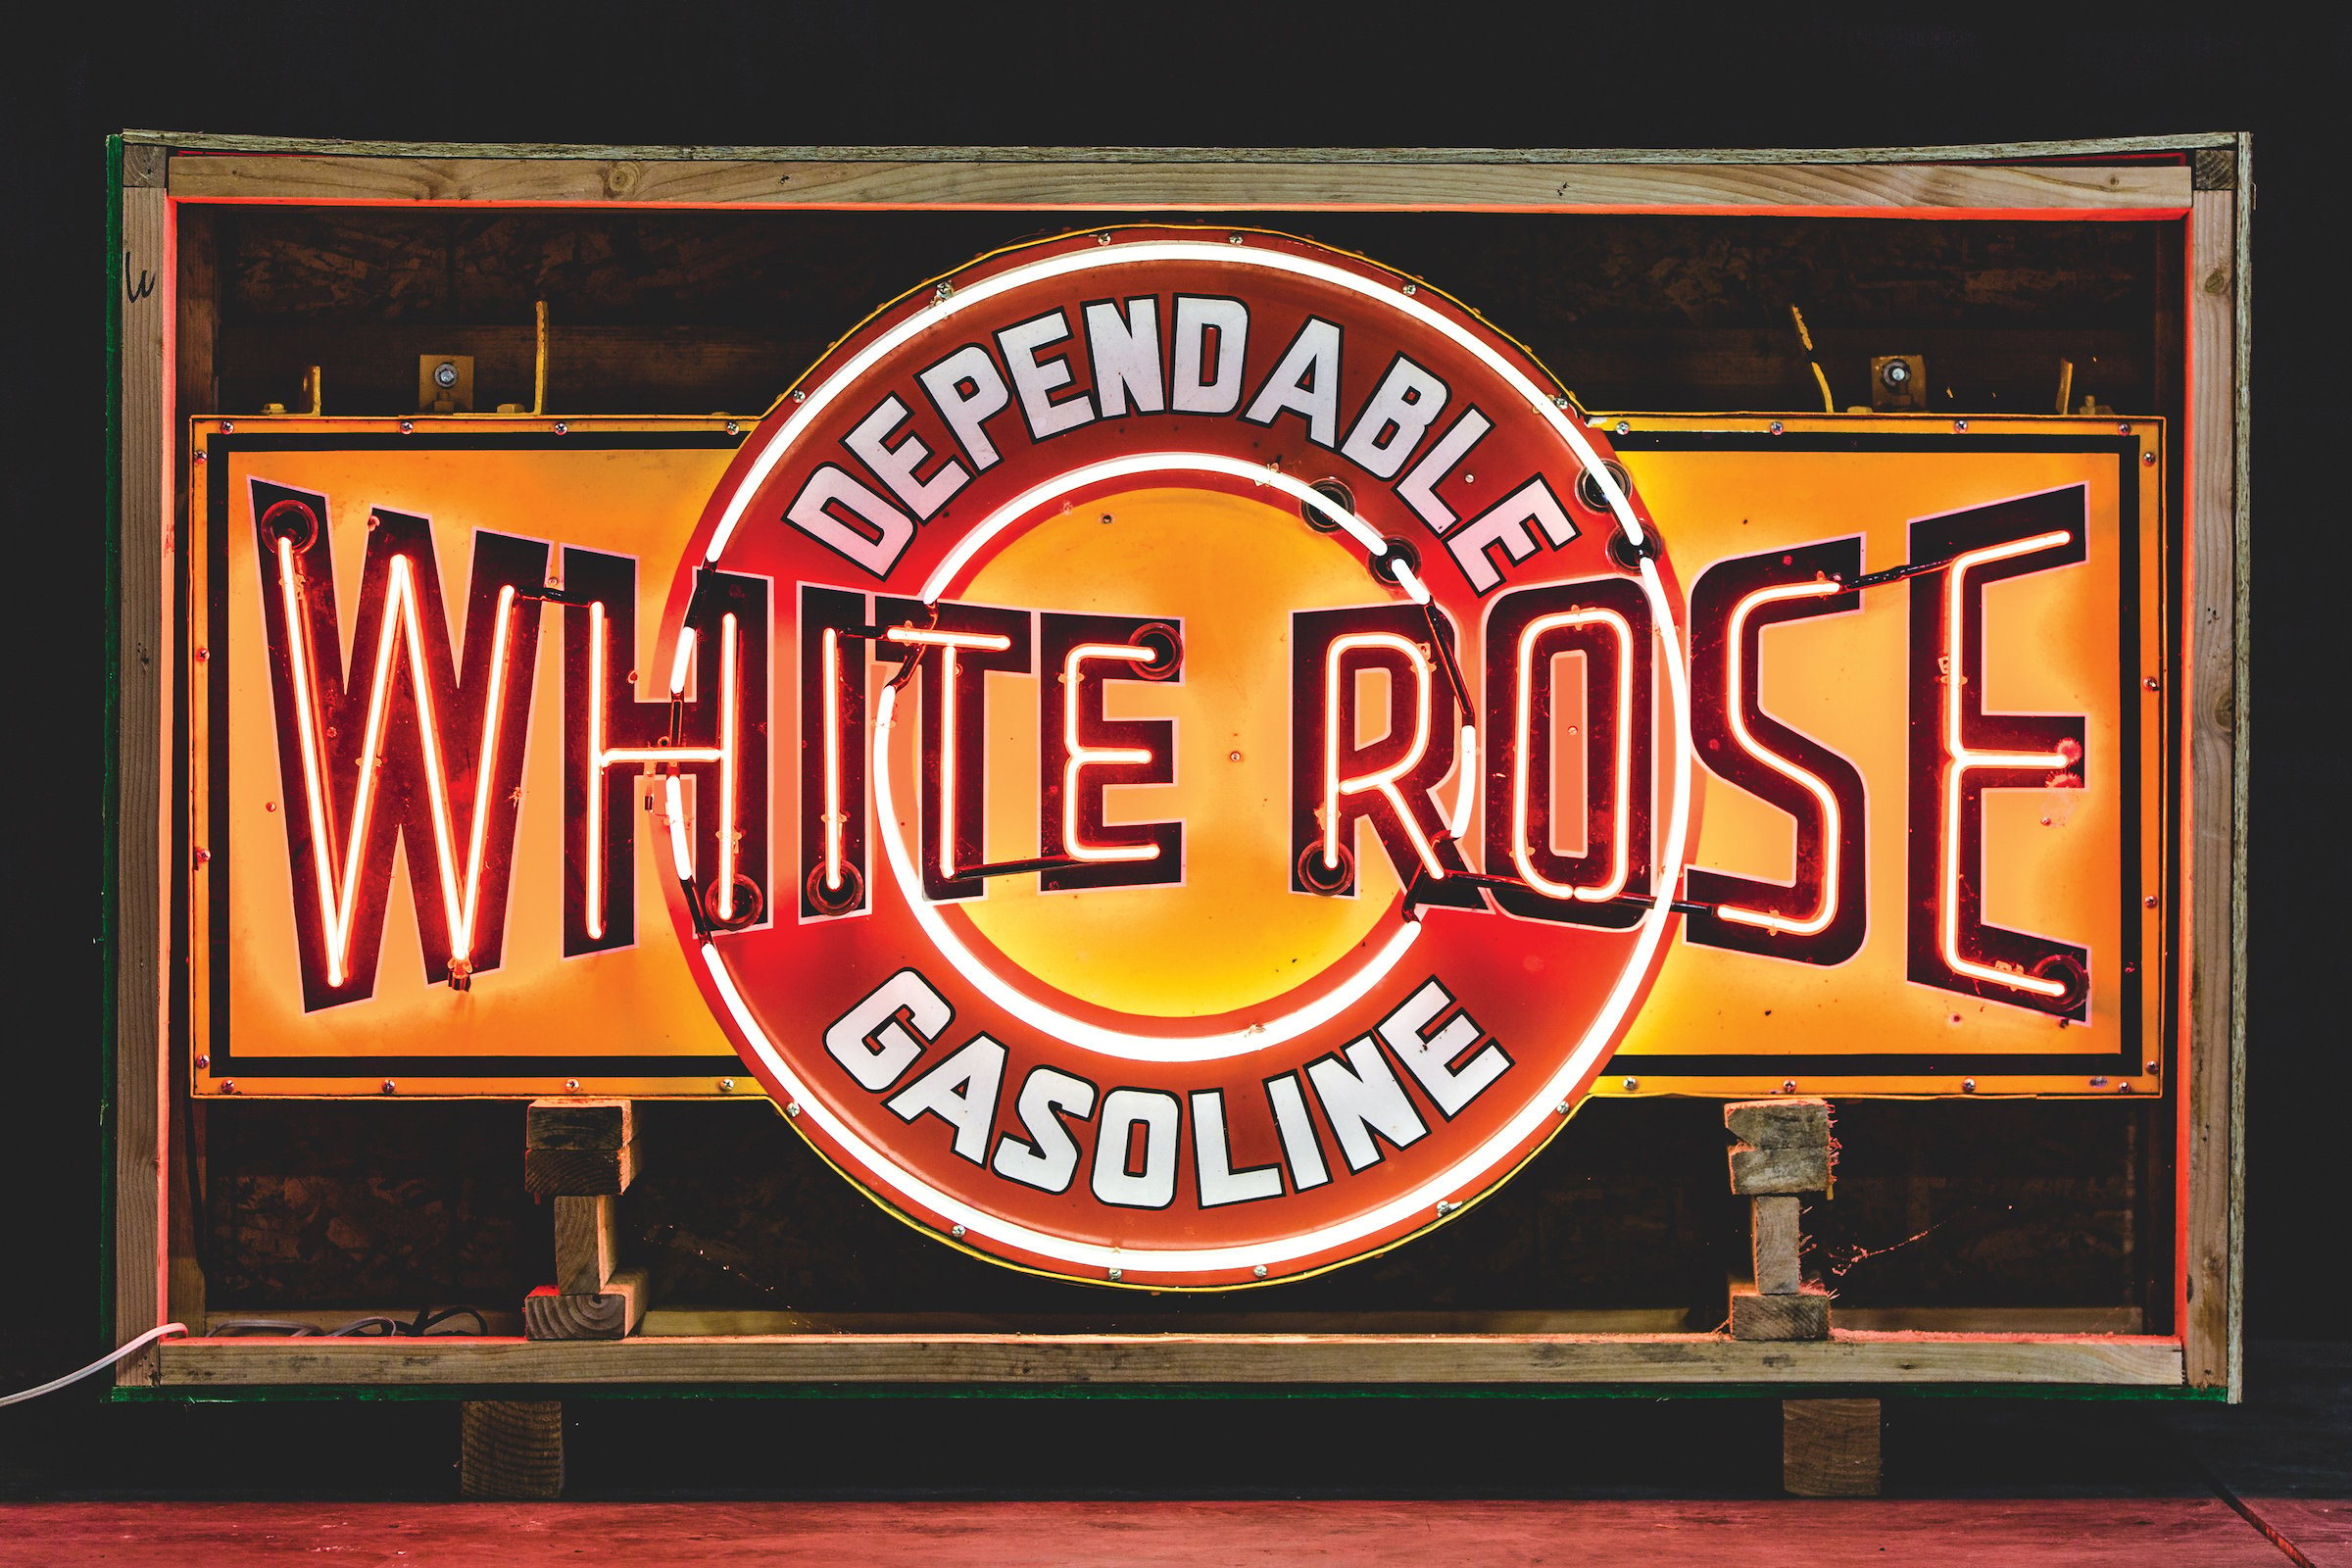 NATIONAL LIGHT WHITE ROSE GASOLINE GAS WEATHERED BUILDING SIGN DECAL 3X2 DD113 